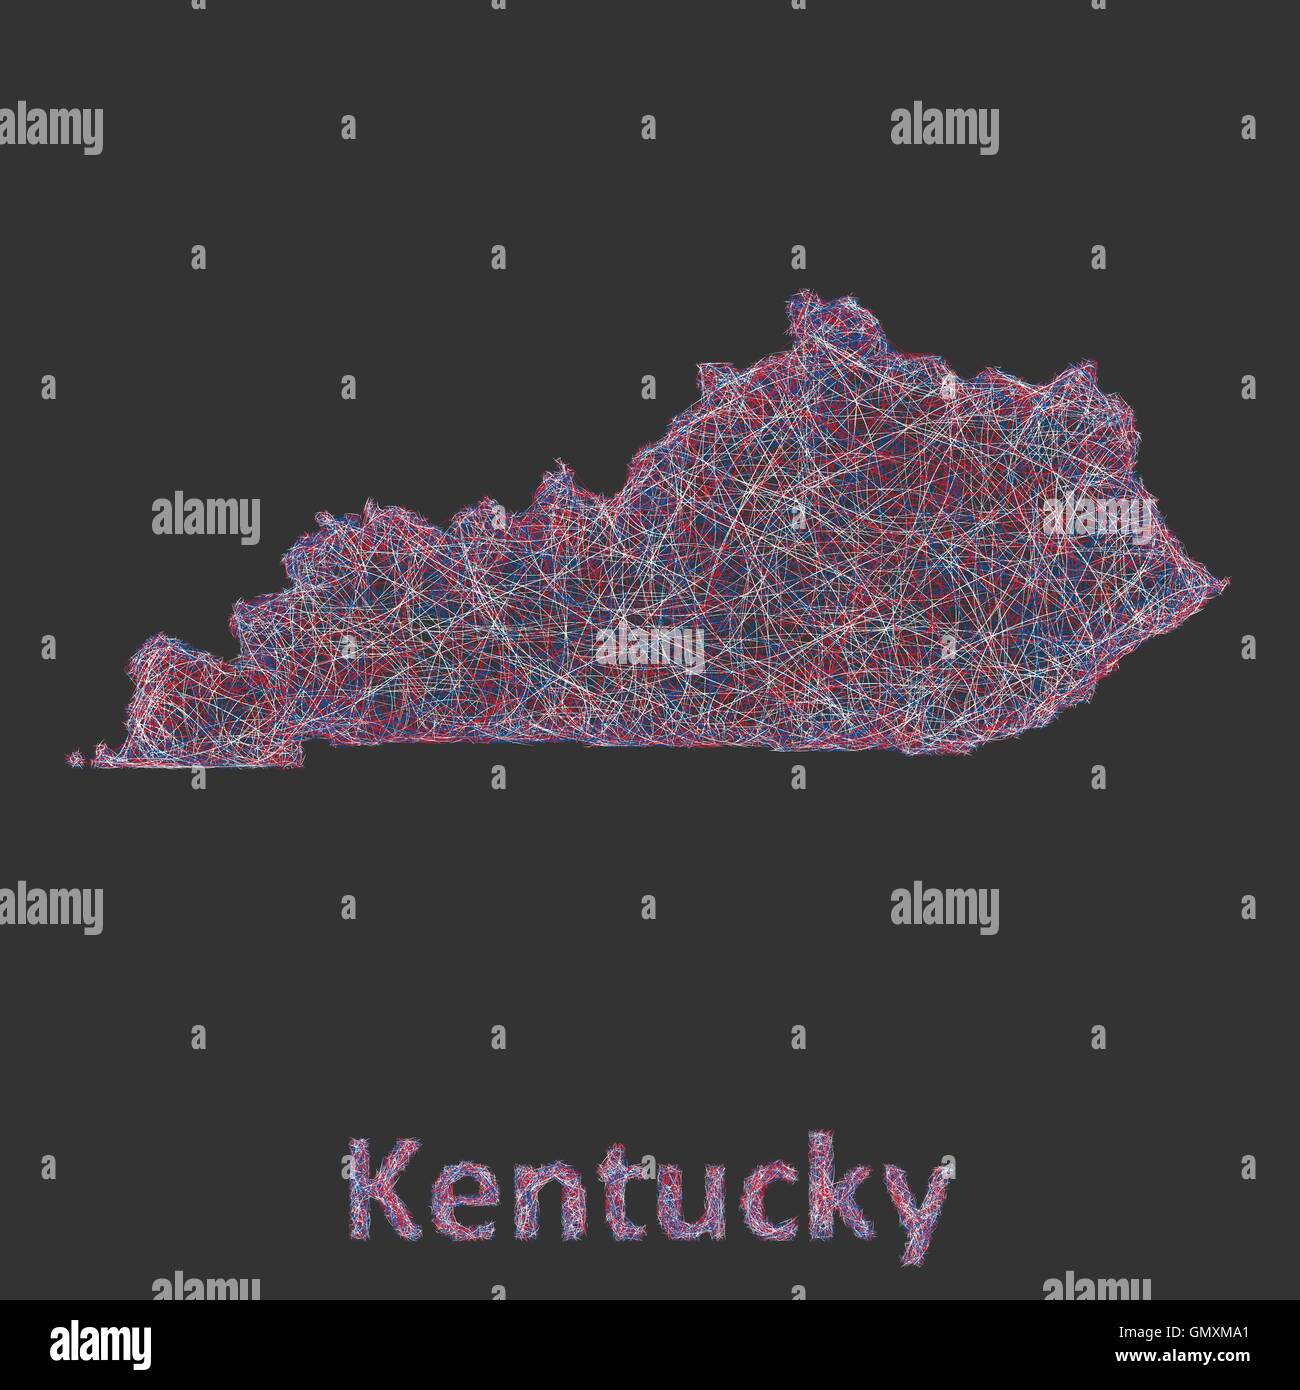 Frankfort Kentucky City Map Founded 1786 University of Louisville Color  Palette T-Shirt by Design Turnpike - Instaprints